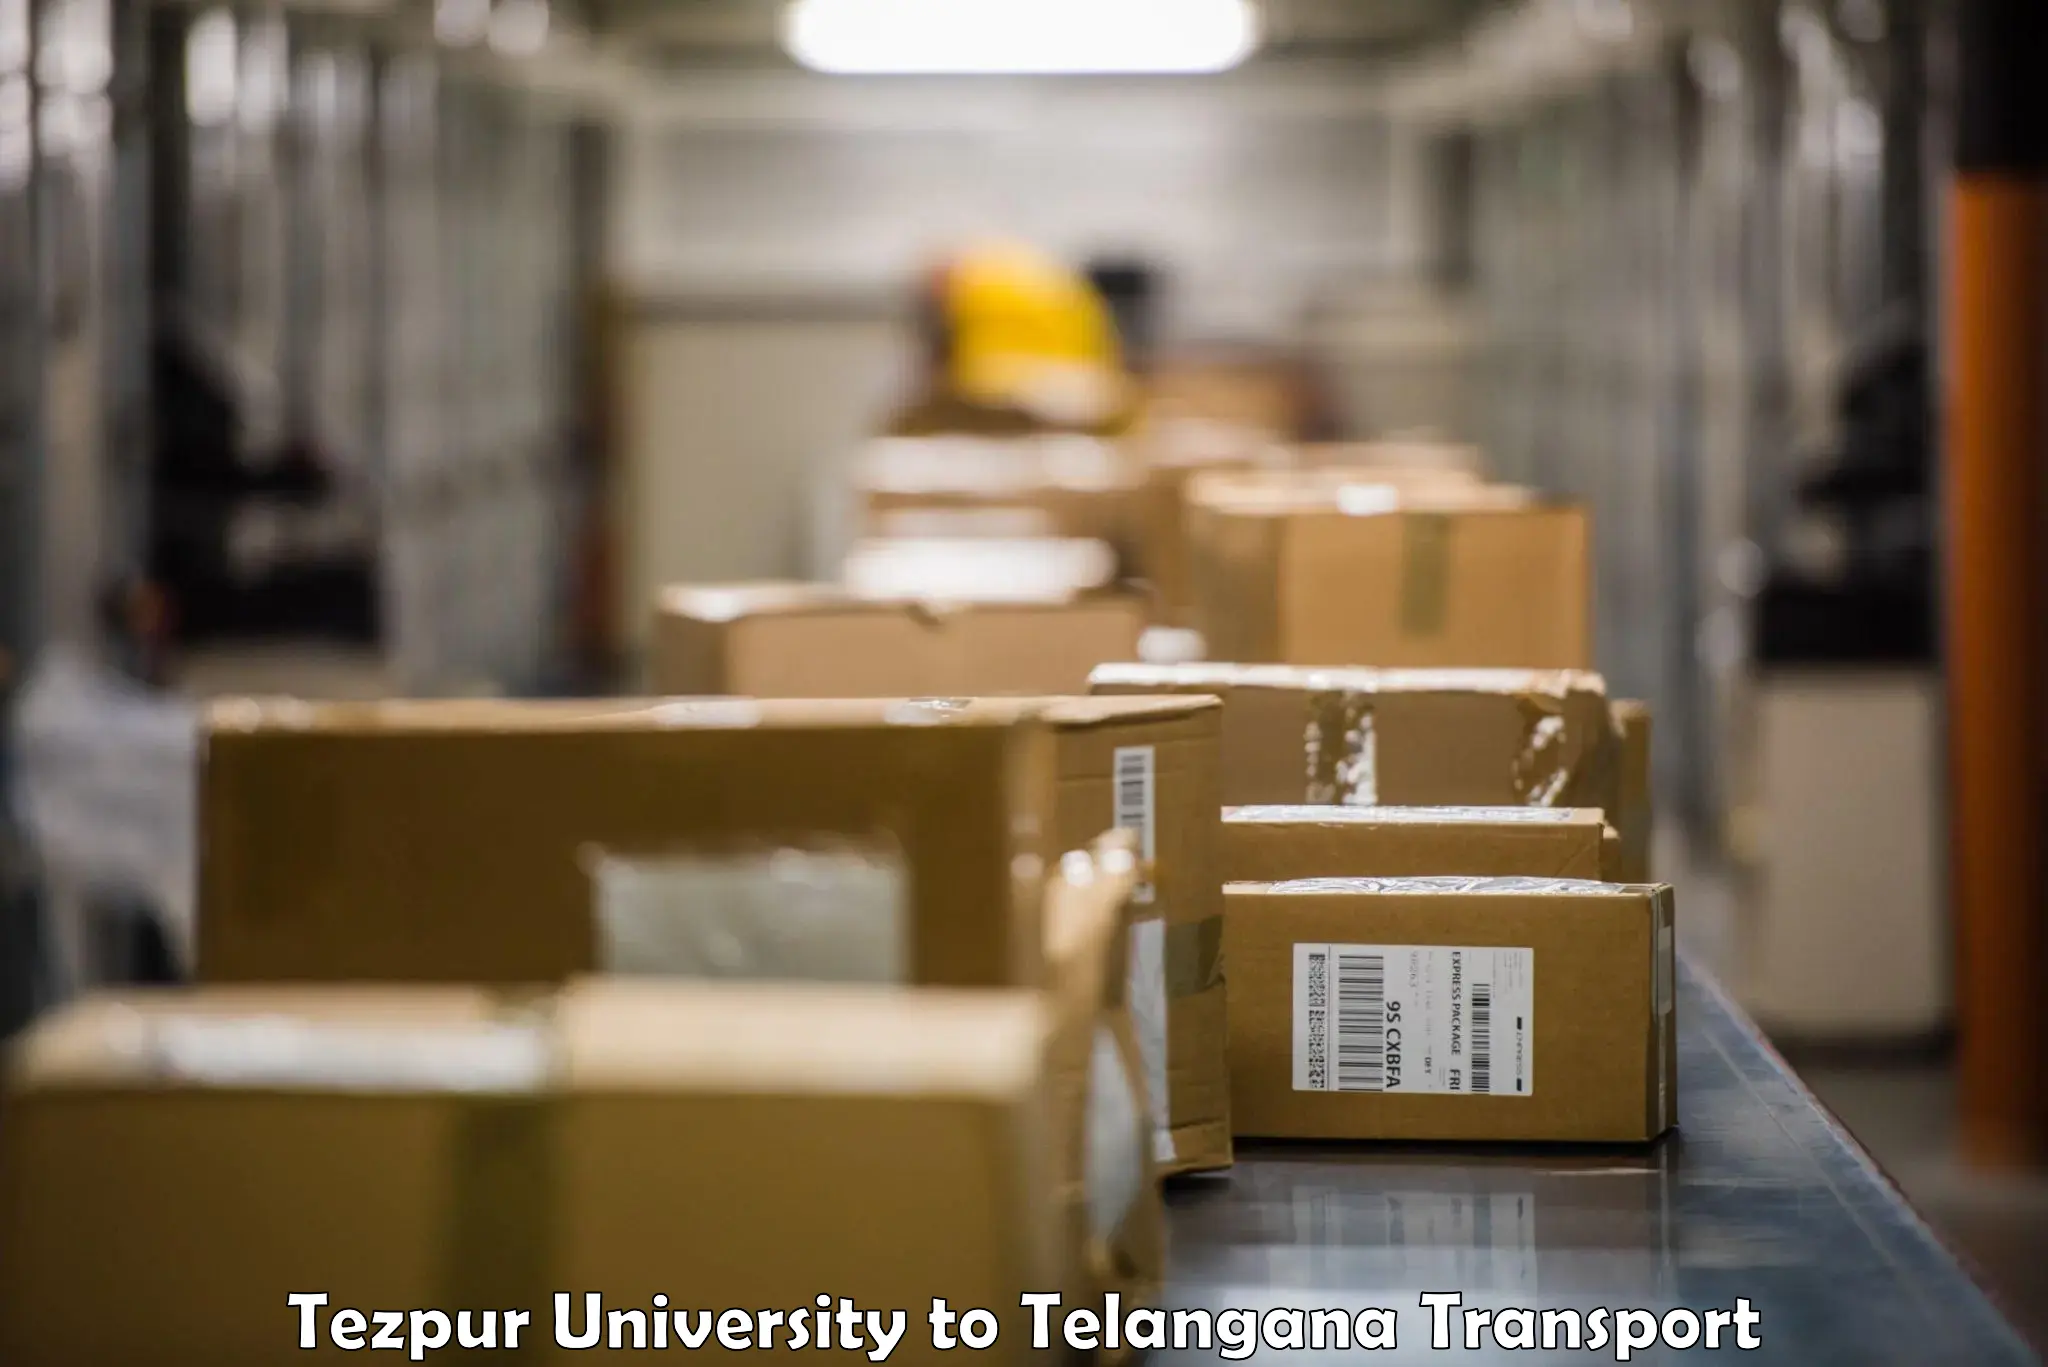 Part load transport service in India Tezpur University to Khairatabad